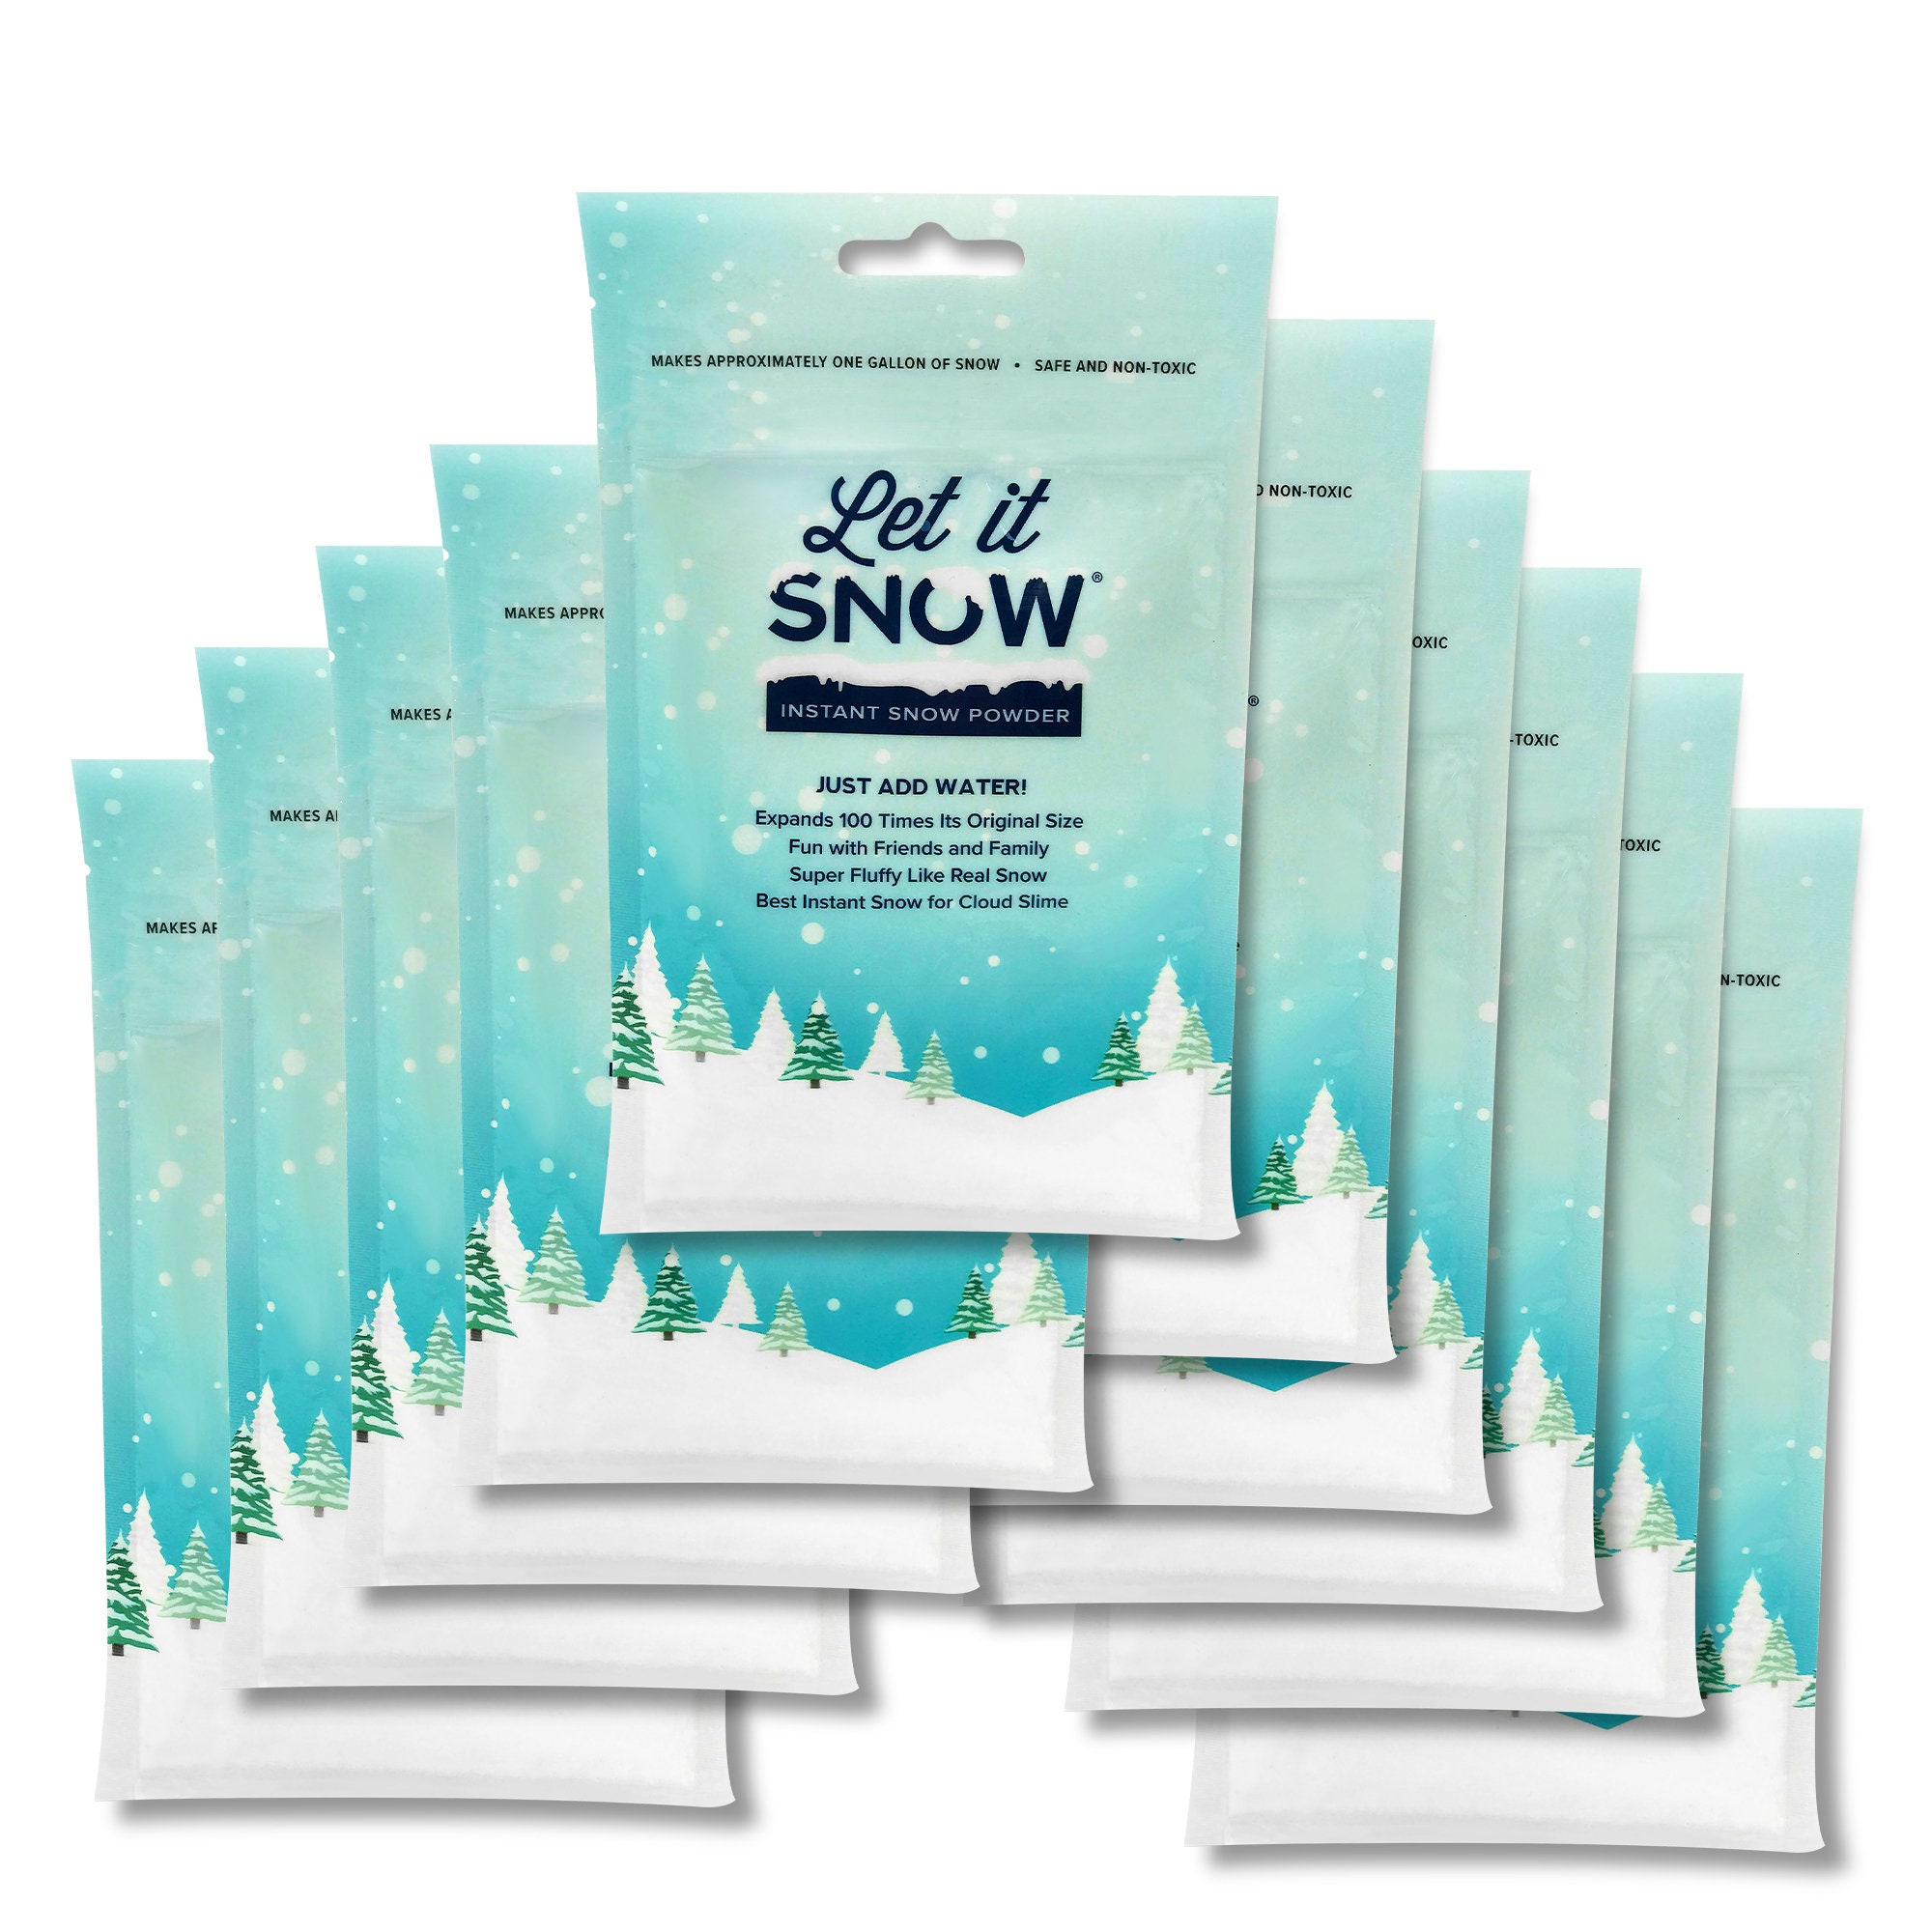 Instant Snow Powder - Makes 10 Gallons of Fake Snow Per Can - Lot